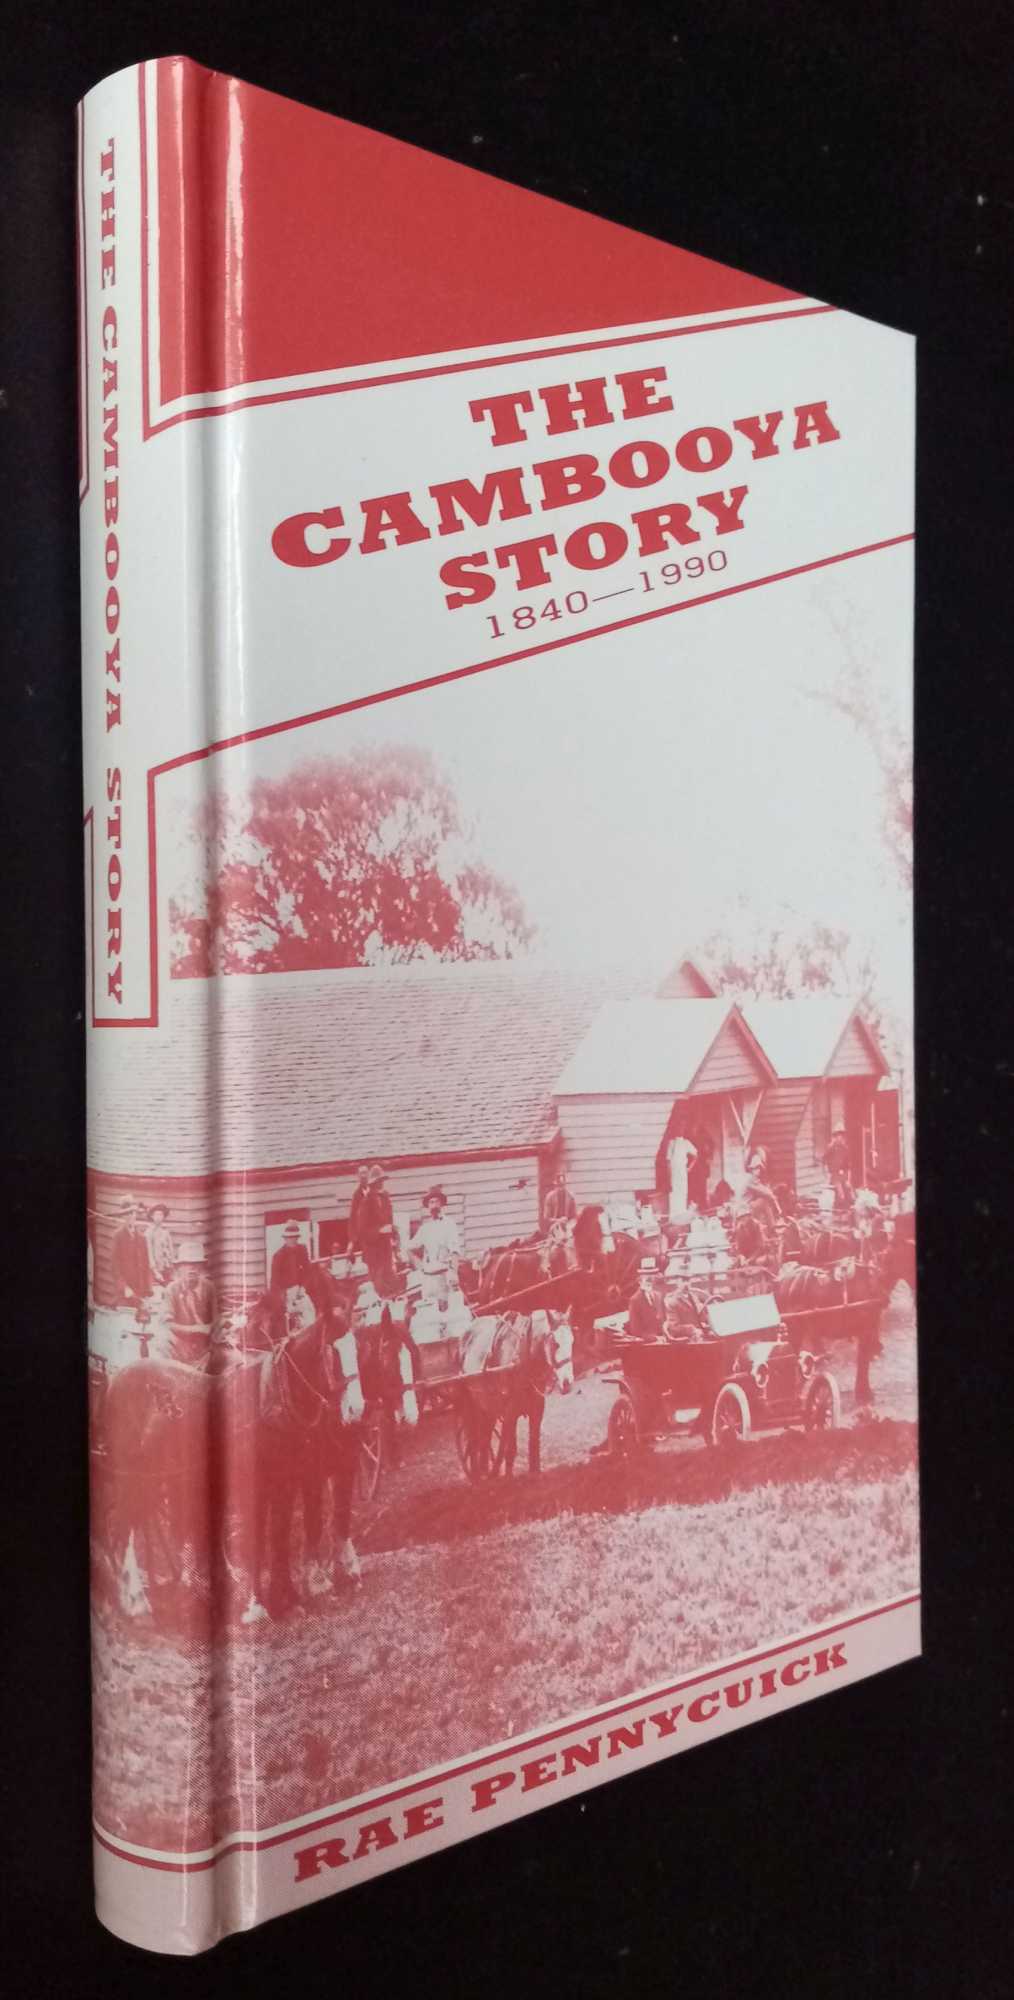 Rae Pennycuick - The Cambooya Story 1840-1990     SIGNED/Inscribed